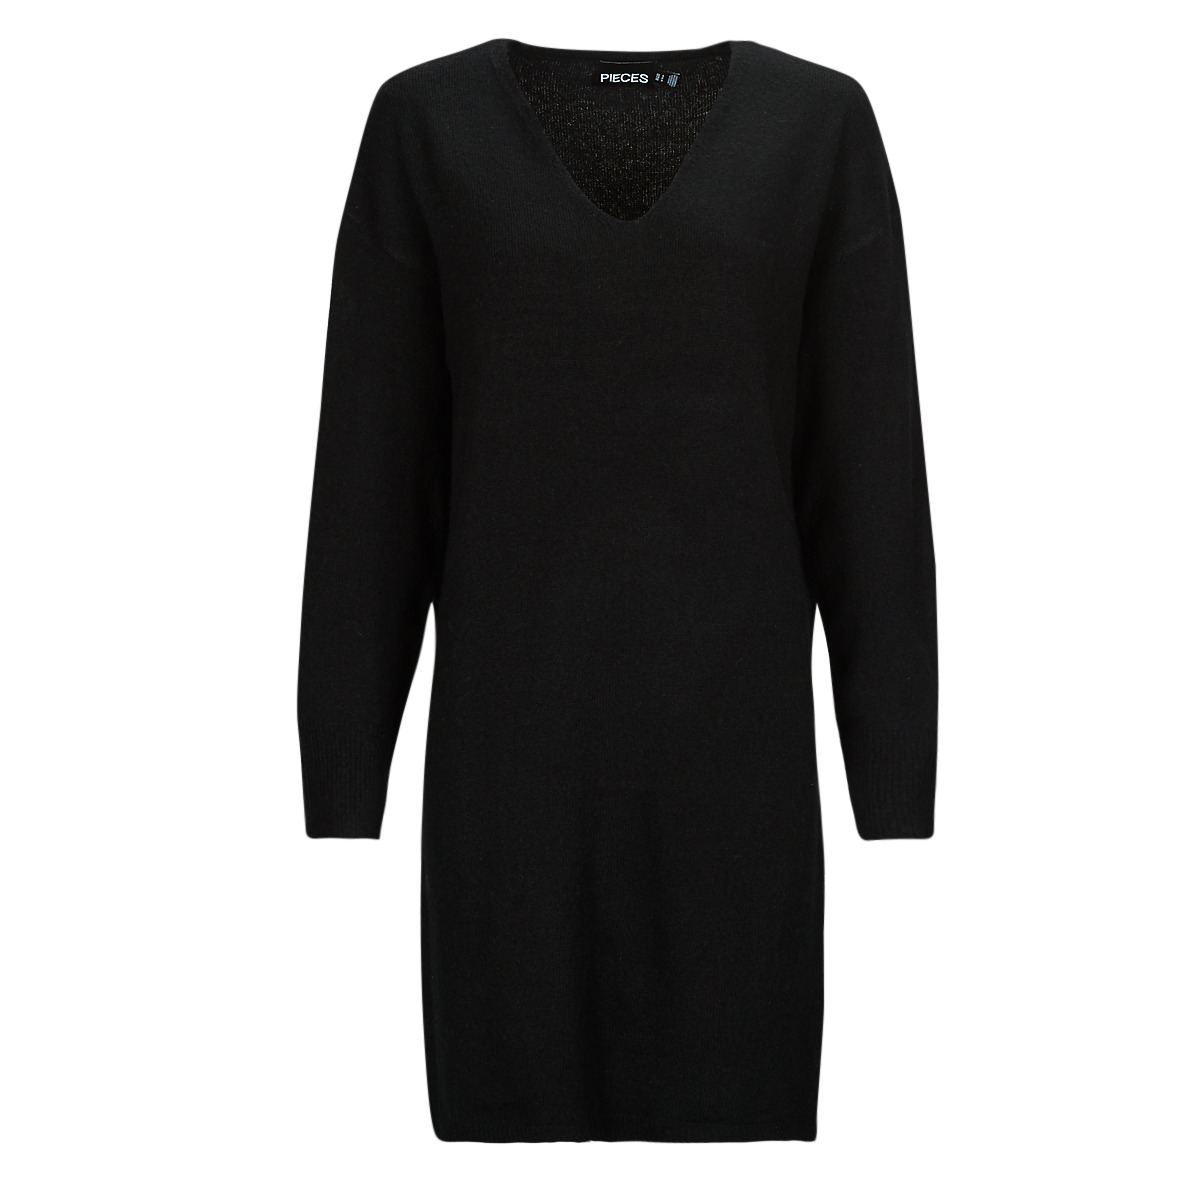 Pieces PCJULIANA LS V-NECK KNIT DRESS NOOS BC Black - Free delivery |  Spartoo NET ! - Clothing Short Dresses Women